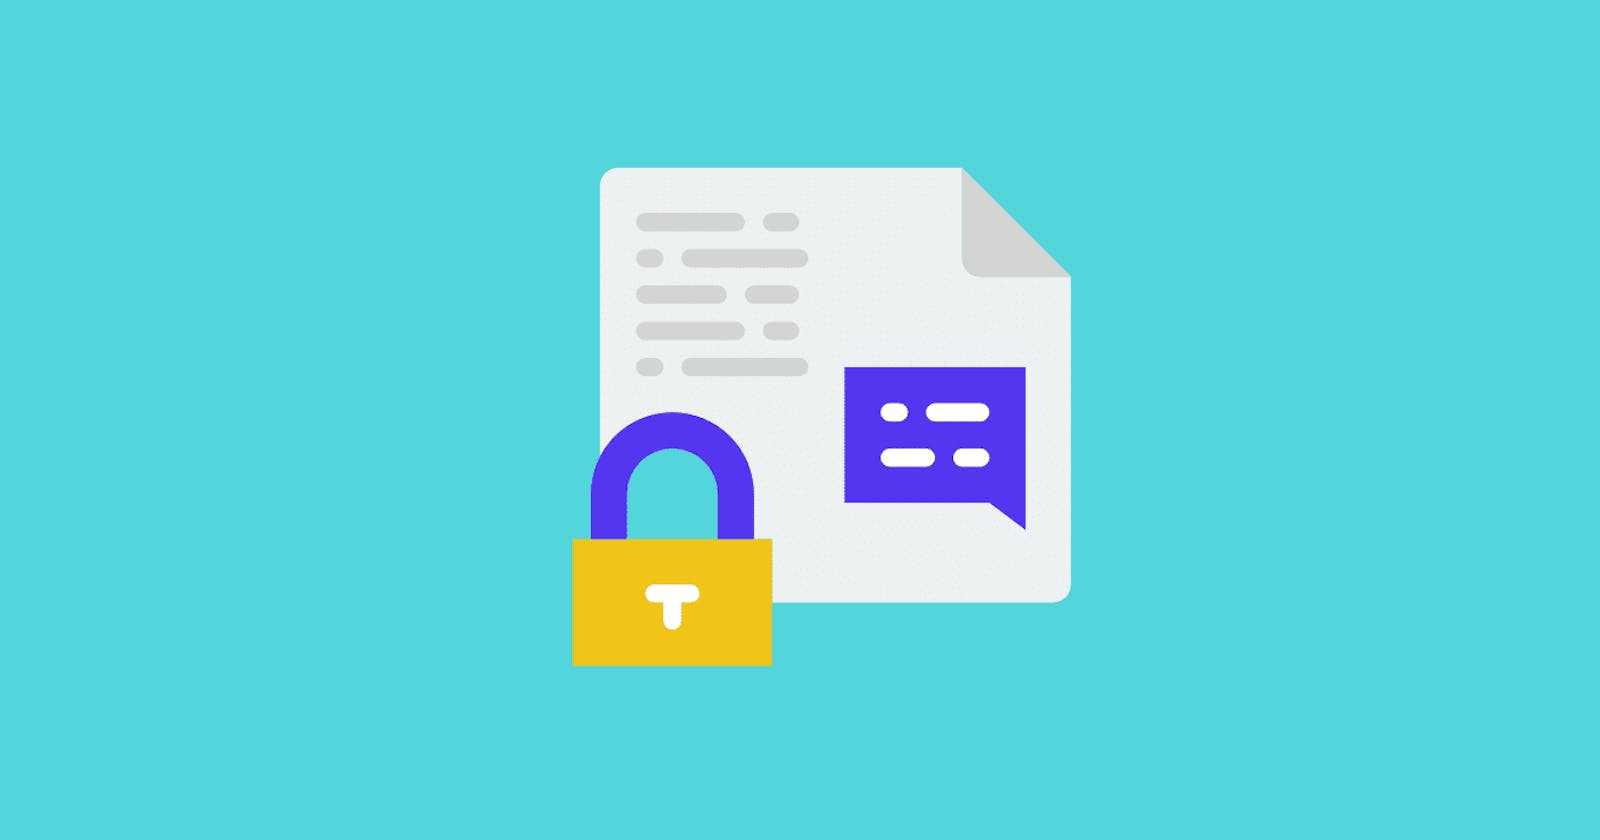 How to obtain a SSL Wildcard certificate From Letsencrypt and upload it to Heroku